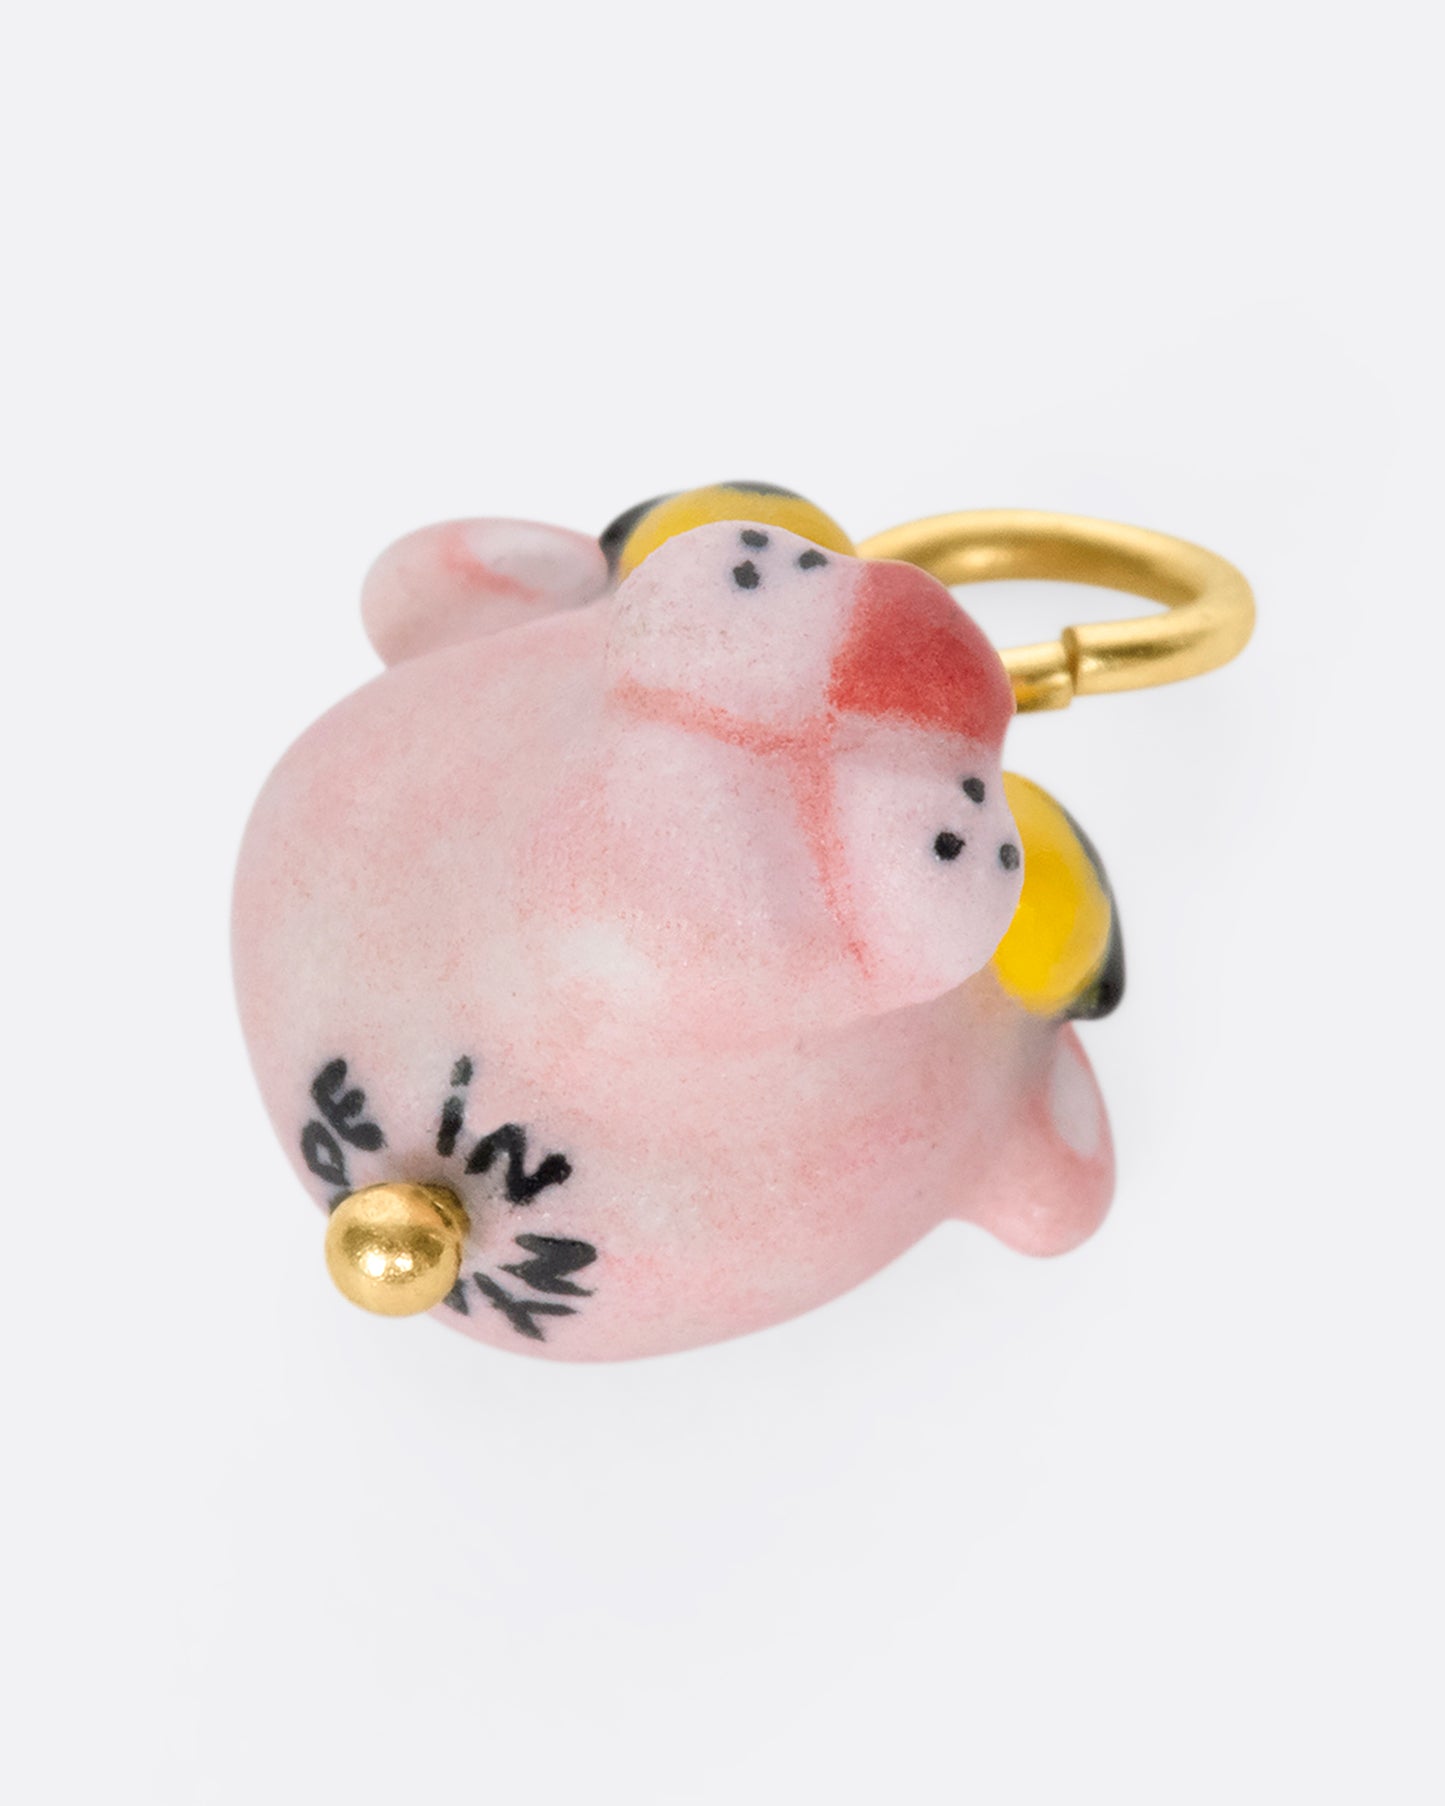 A handmade and painted porcelain Pink Panther charm with a 14k gold bail